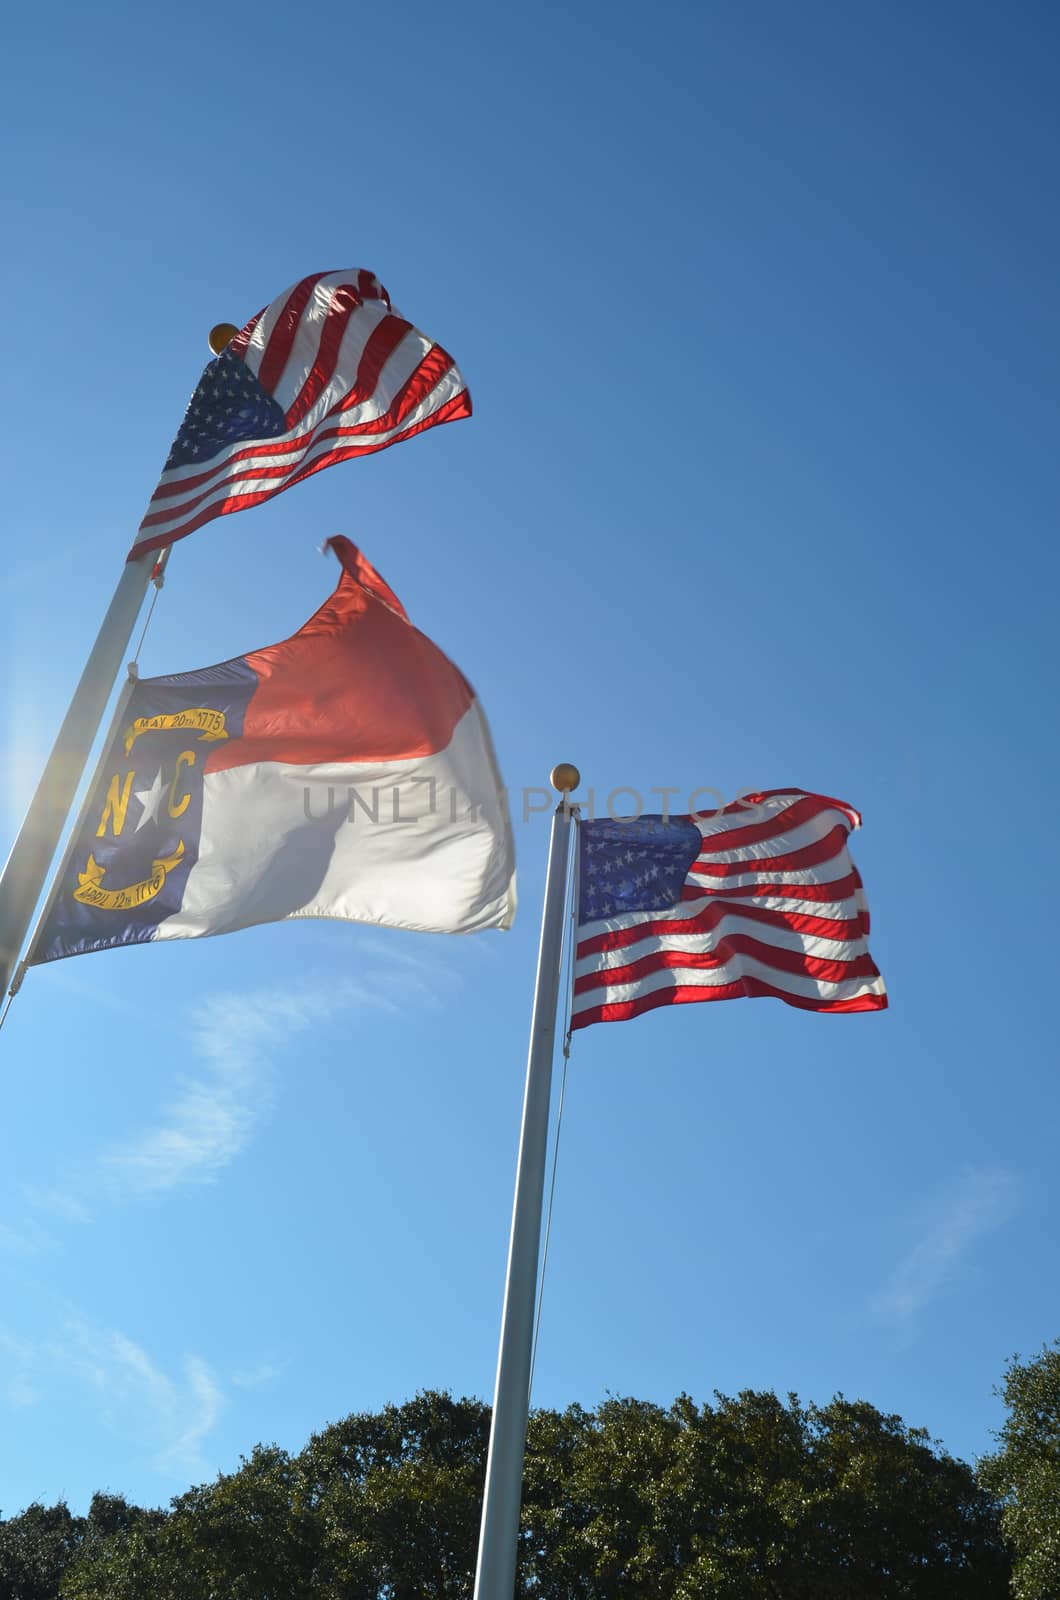 American flag flying in the wind along with a North Carolina flag